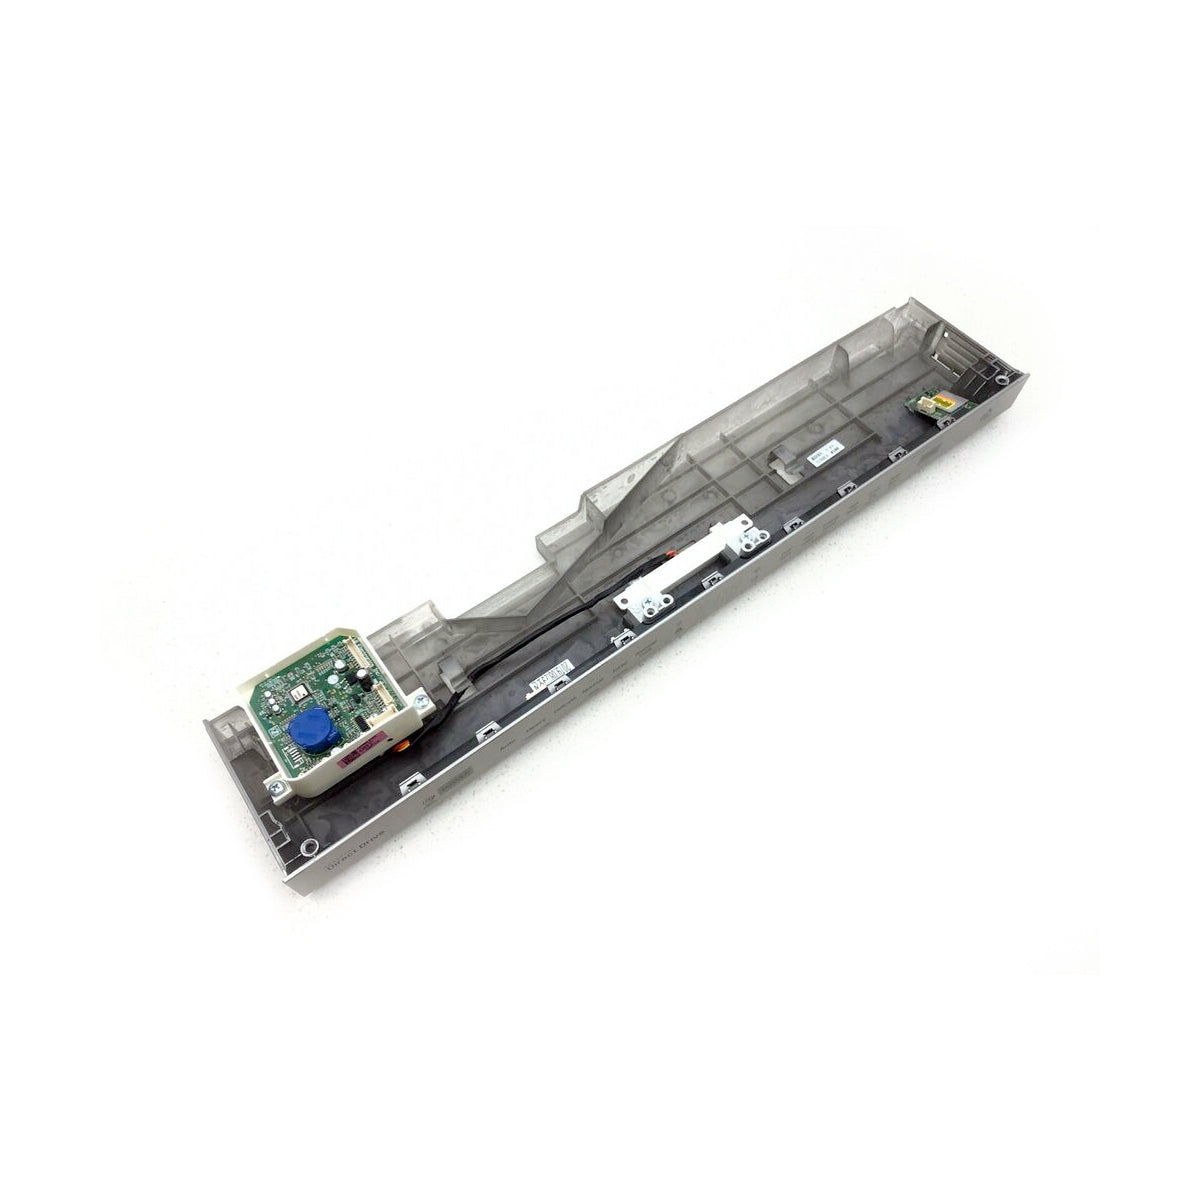 LG AGL76194001 Front Panel Assembly